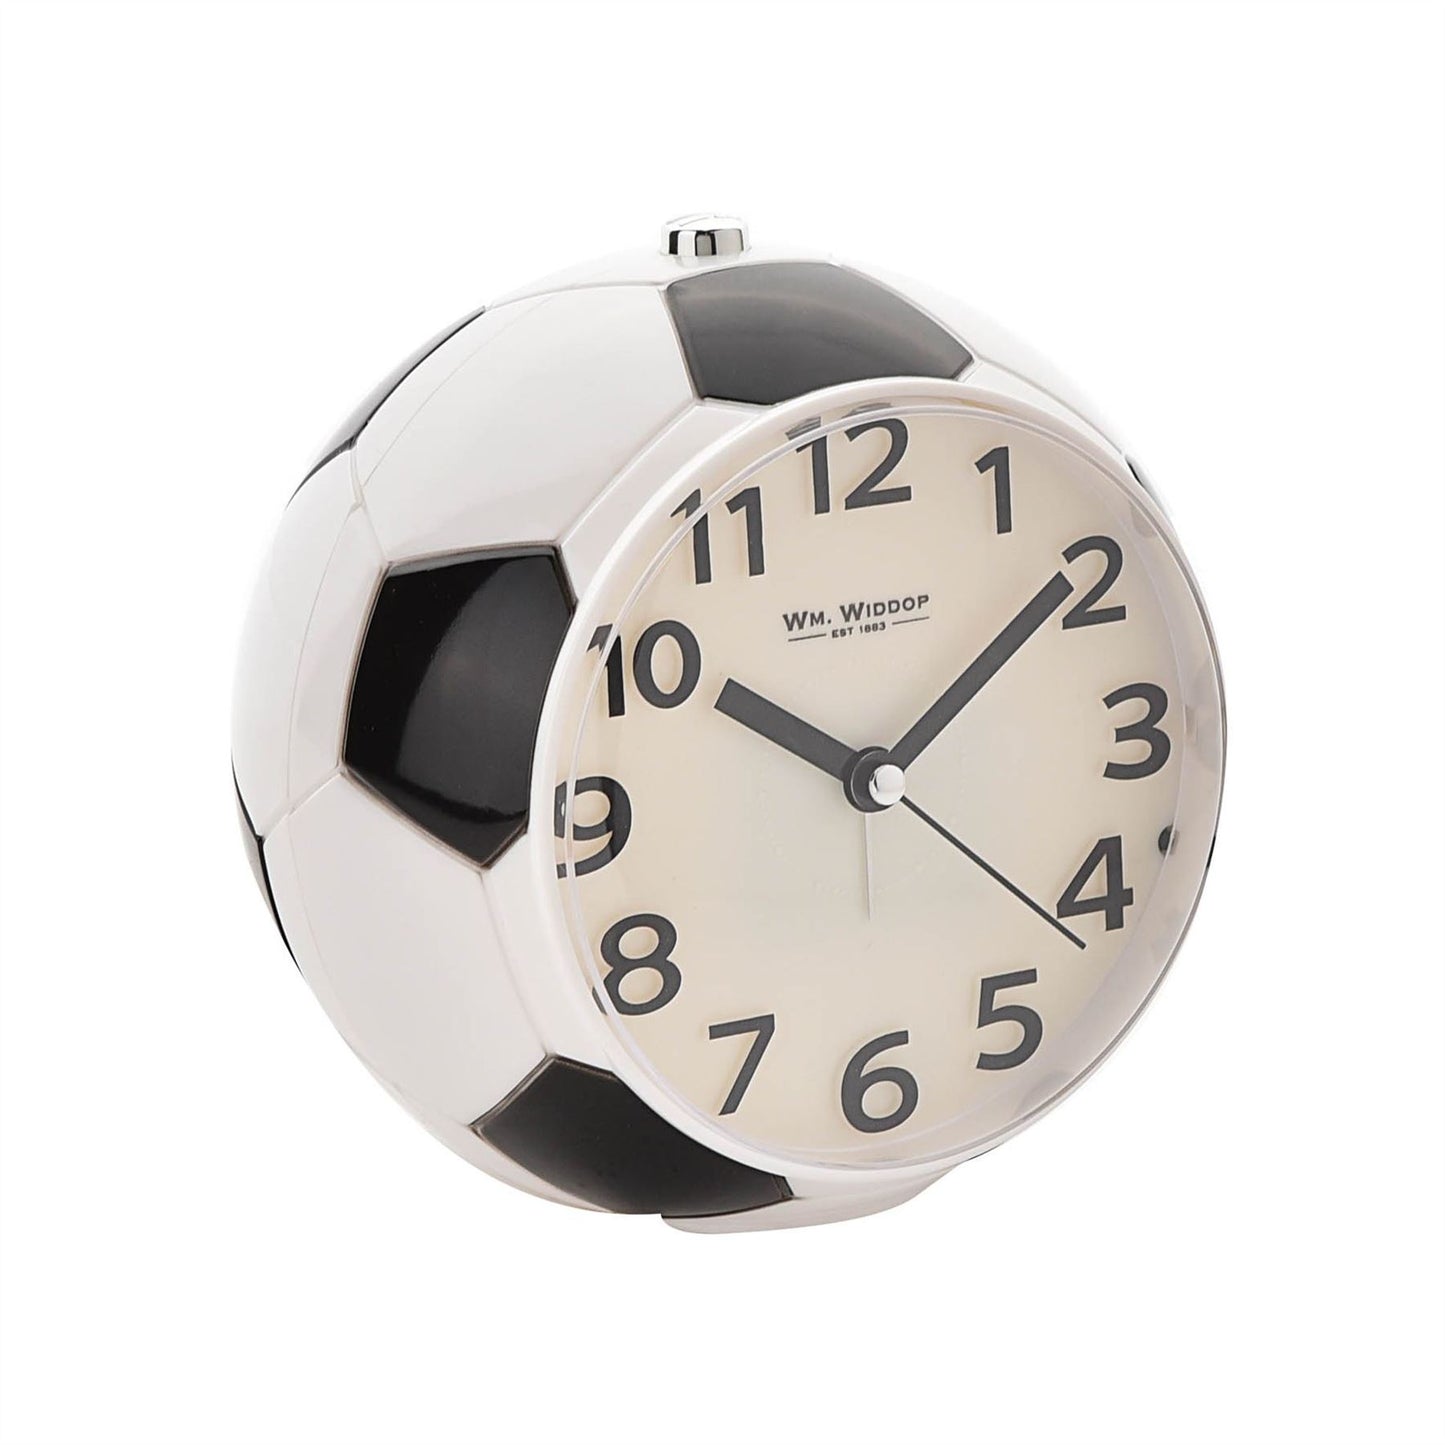 Football Alarm Clock with Touch Lens - Light & Snooze